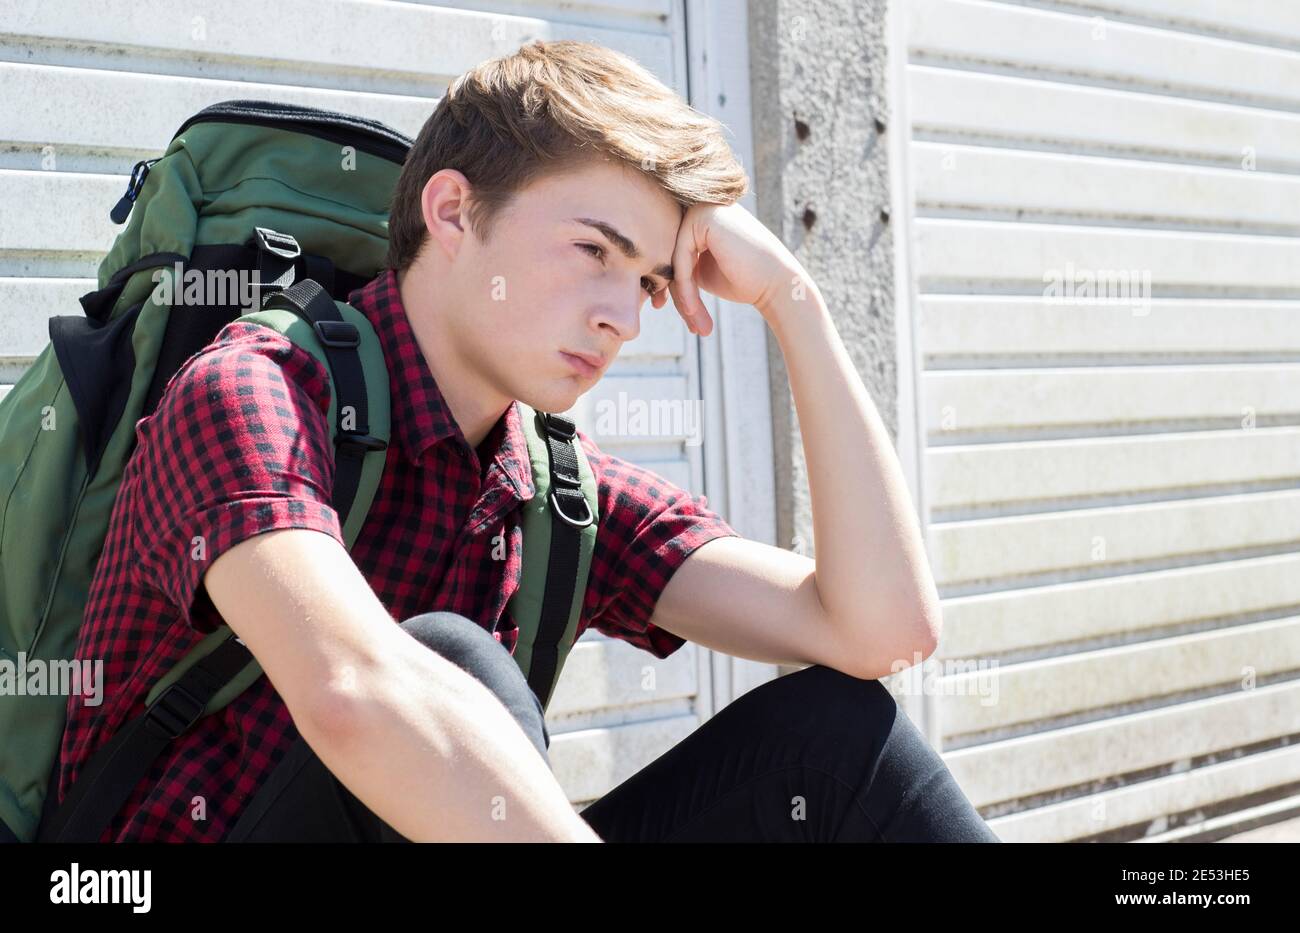 Vulnerable Teenage Boy On The Street After Leaving Home Stock Photo